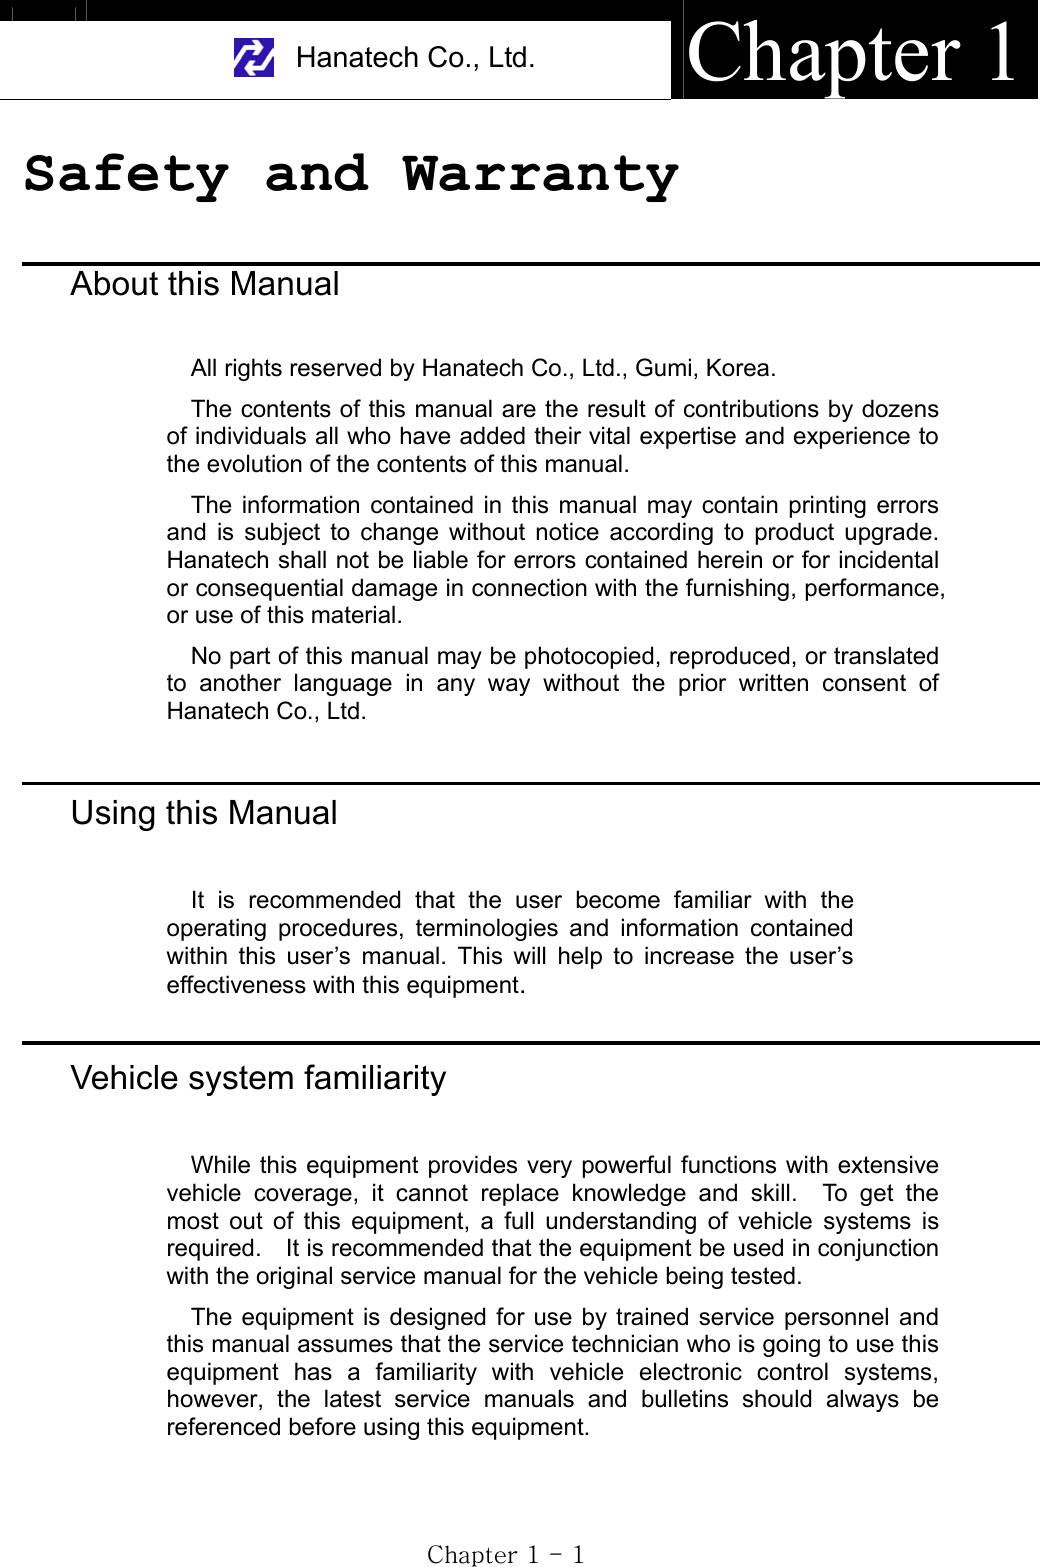 Hanatech Co., Ltd.  Chapter 1GjGXGTGXGSafety and Warranty GAbout this ManualAll rights reserved by Hanatech Co., Ltd., Gumi, Korea. The contents of this manual are the result of contributions by dozens of individuals all who have added their vital expertise and experience to the evolution of the contents of this manual. The information contained in this manual may contain printing errors and is subject to change without notice according to product upgrade.  Hanatech shall not be liable for errors contained herein or for incidental or consequential damage in connection with the furnishing, performance, or use of this material. No part of this manual may be photocopied, reproduced, or translated to another language in any way without the prior written consent of Hanatech Co., Ltd.ٻٻٻٻٻٻUsing this ManualIt is recommended that the user become familiar with the operating procedures, terminologies and information contained within this user’s manual. This will help to increase the user’s effectiveness with this equipment.Vehicle system familiarityWhile this equipment provides very powerful functions with extensive vehicle coverage, it cannot replace knowledge and skill.  To get the most out of this equipment, a full understanding of vehicle systems is required.    It is recommended that the equipment be used in conjunction with the original service manual for the vehicle being tested.     The equipment is designed for use by trained service personnel and this manual assumes that the service technician who is going to use this equipment has a familiarity with vehicle electronic control systems, however, the latest service manuals and bulletins should always be referenced before using this equipment.ٻ